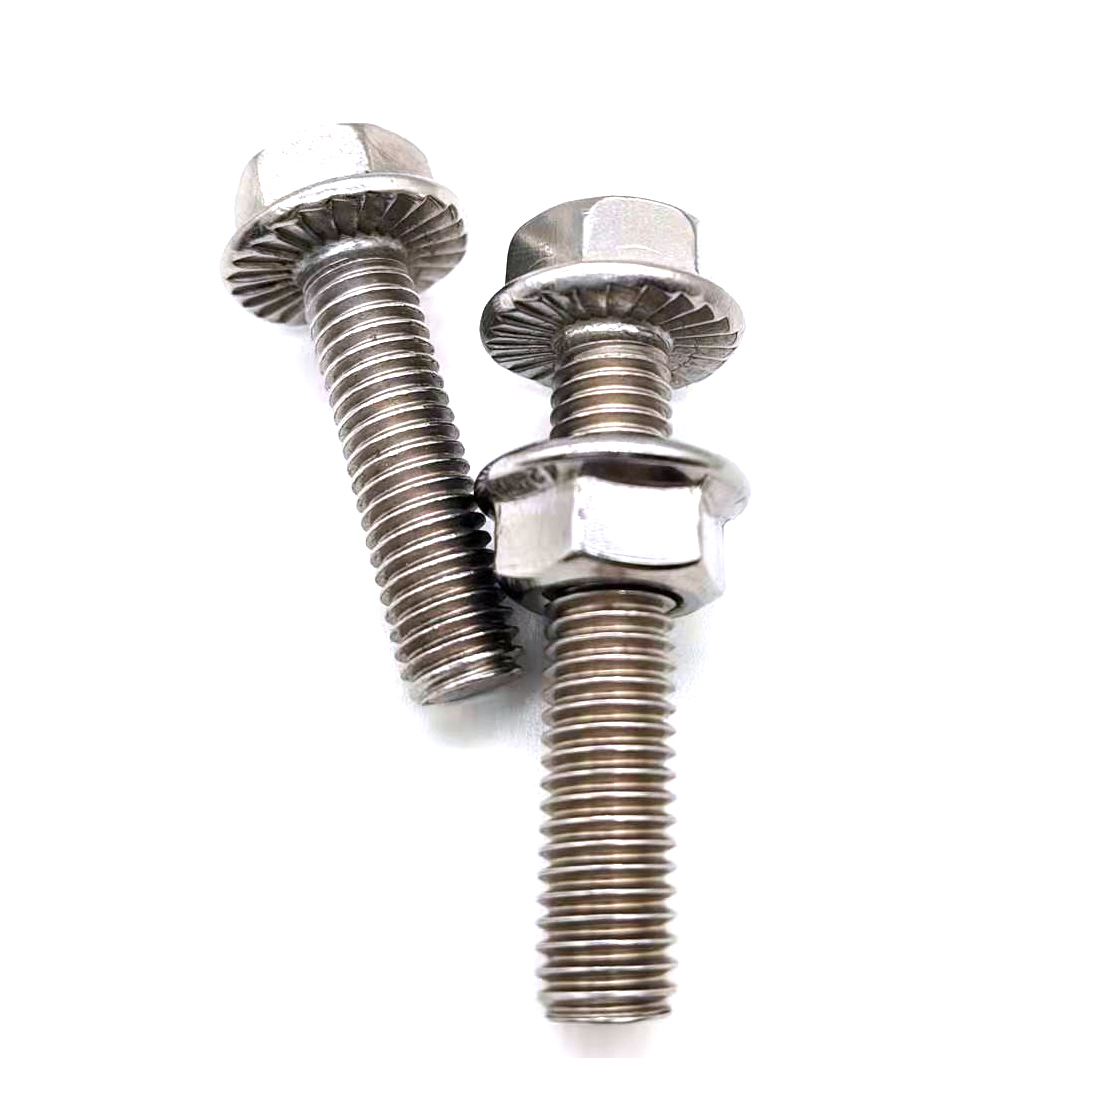 Stainless Steel304/316 Hex Flange Bolt